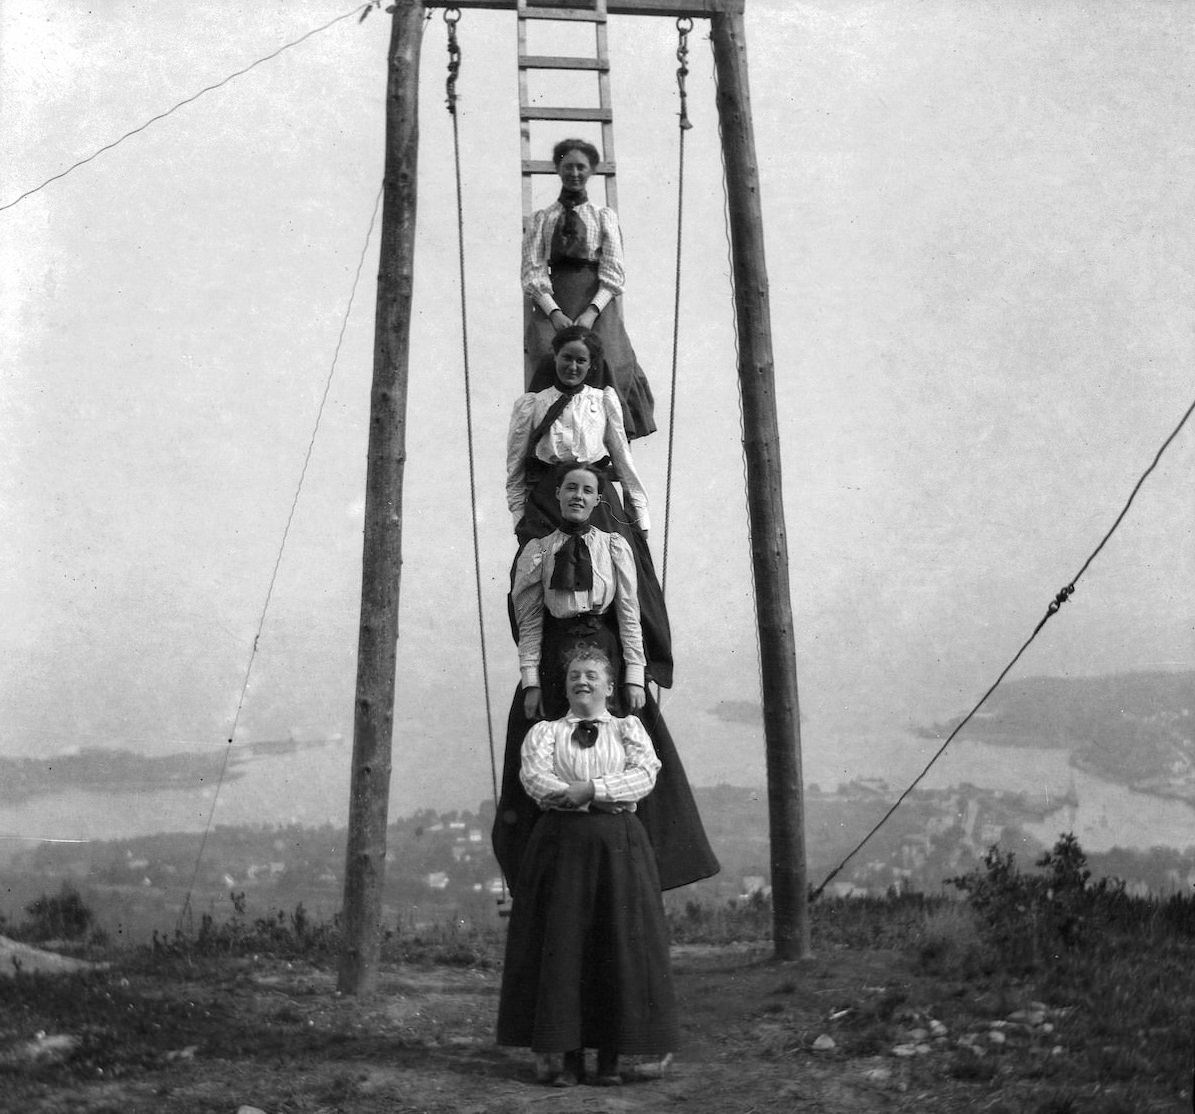 Friends and family of Theresa Babb perched on a ladder by the Summit House swing on August 17, 1898. Her sister Grace Parker is at the top of the ladder.